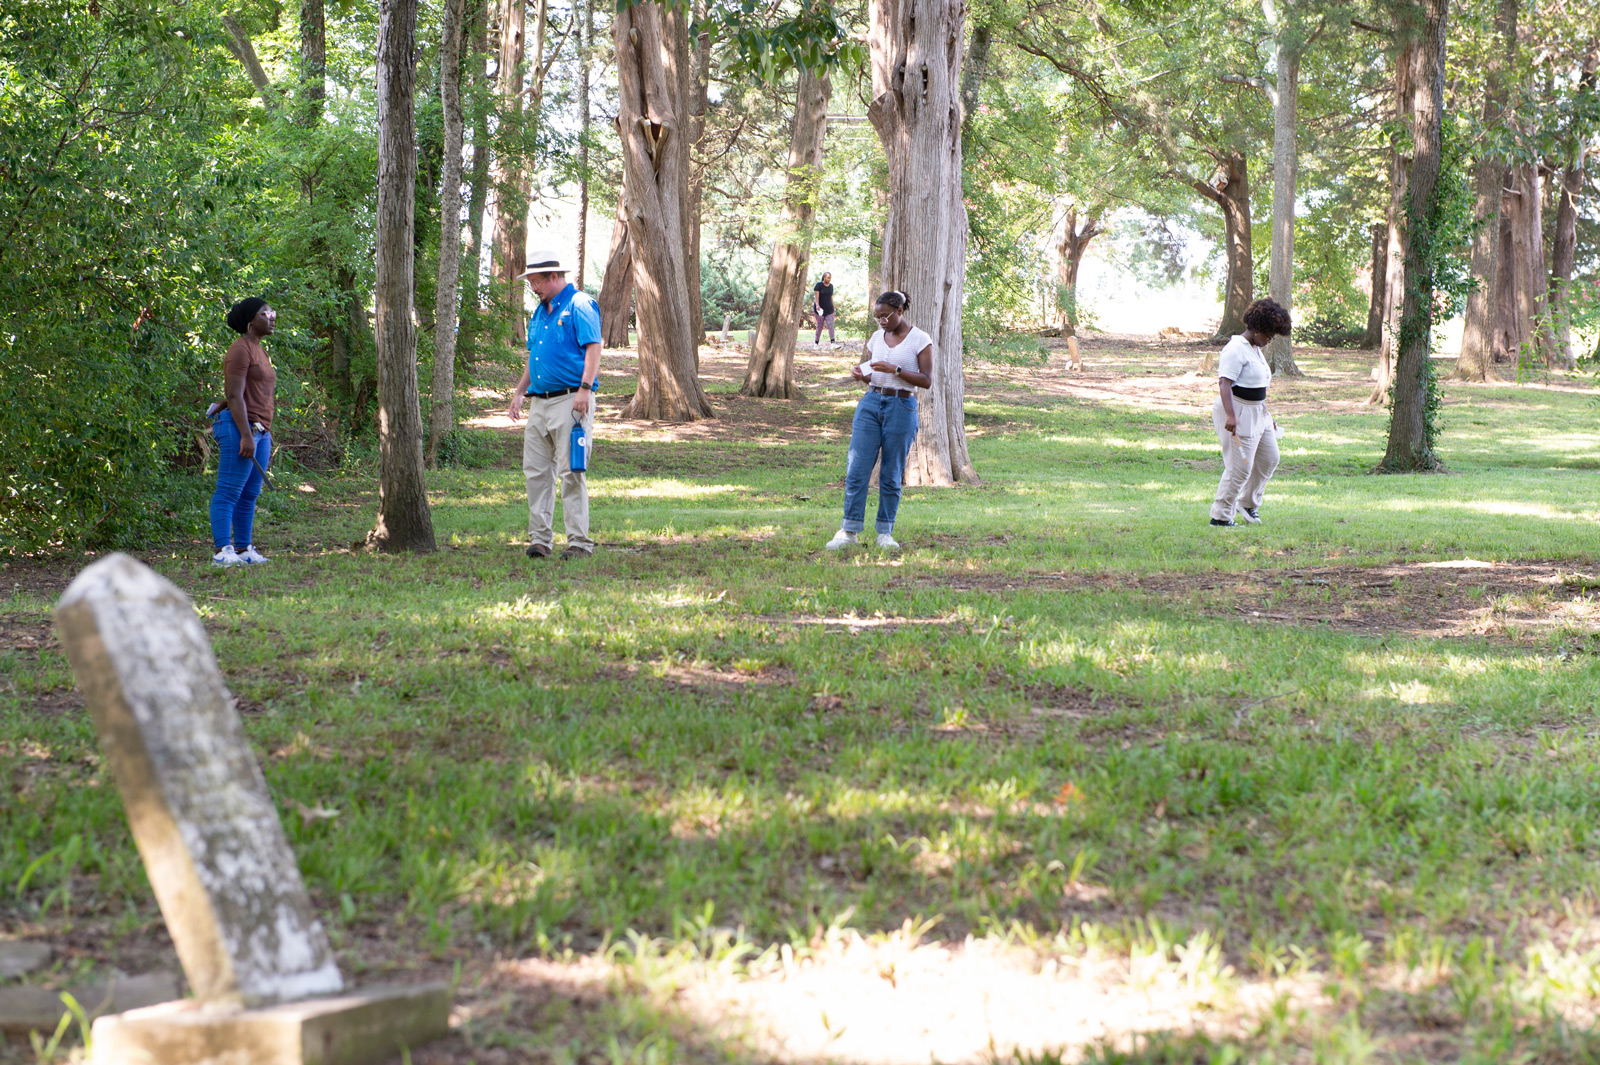 A group of people playing frisbee in a wooded area.